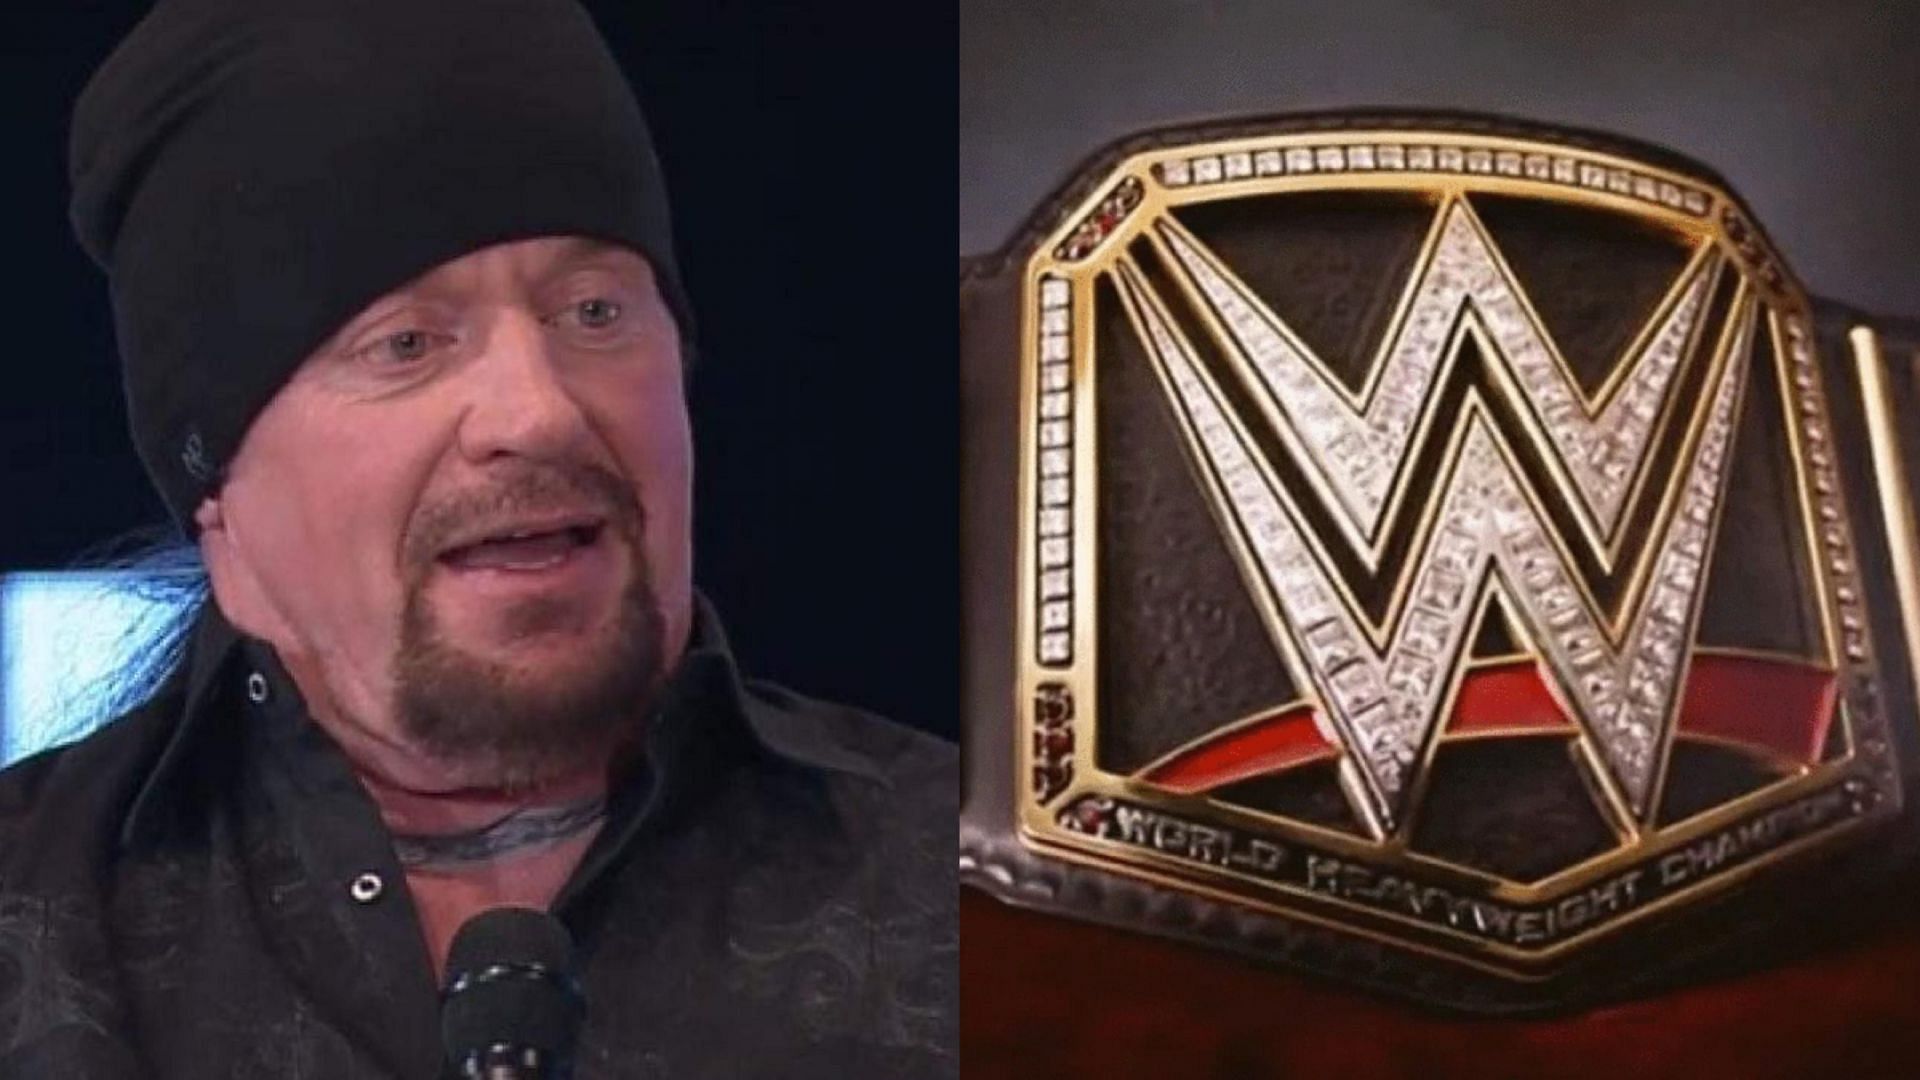 The Undertaker was inducted into the WWE Hall Of Fame in April 2022.